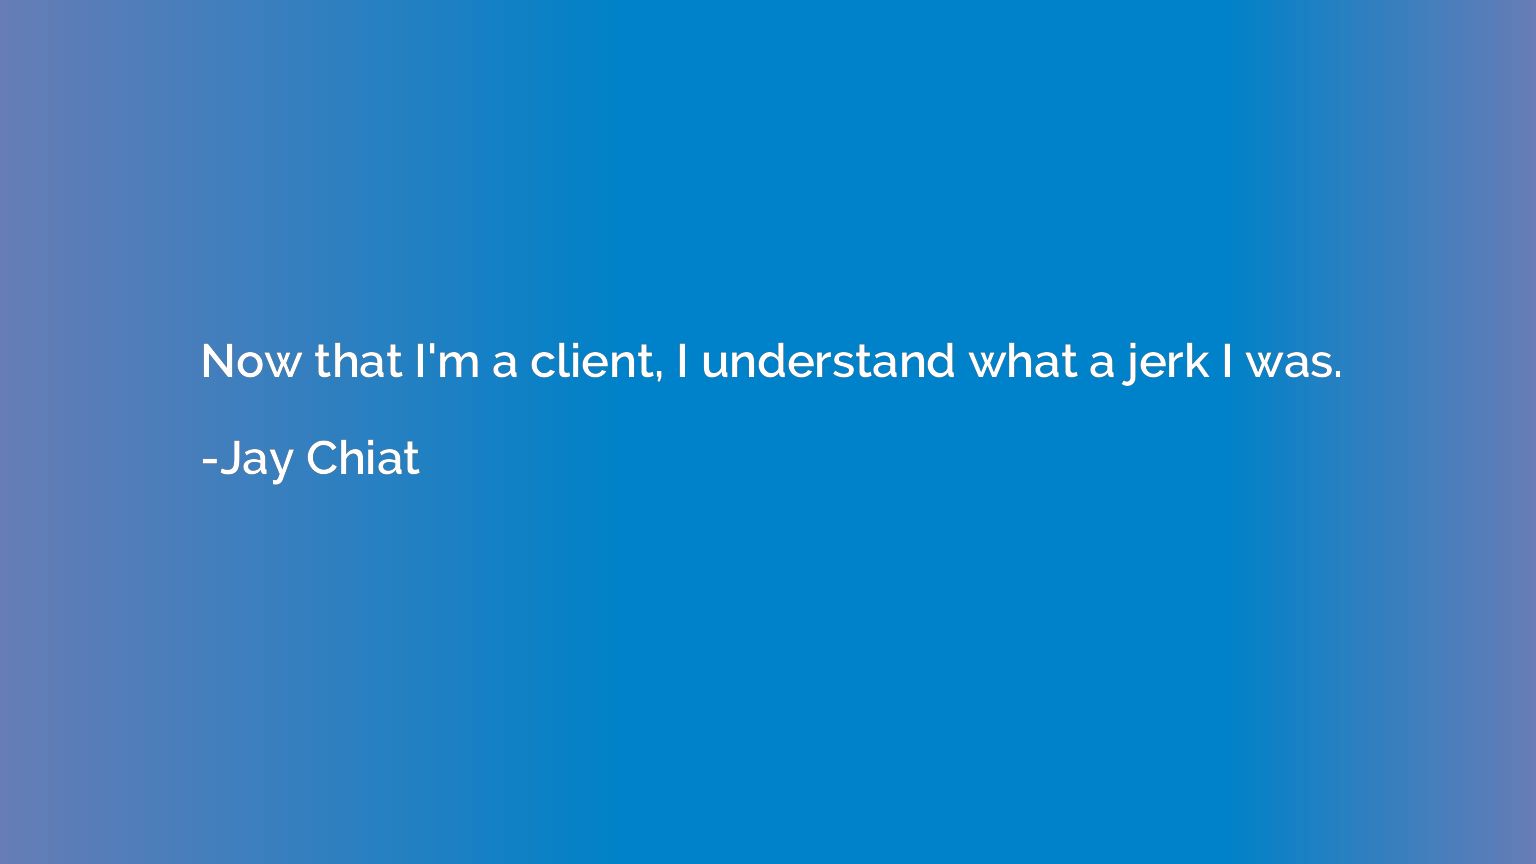 Now that I'm a client, I understand what a jerk I was.